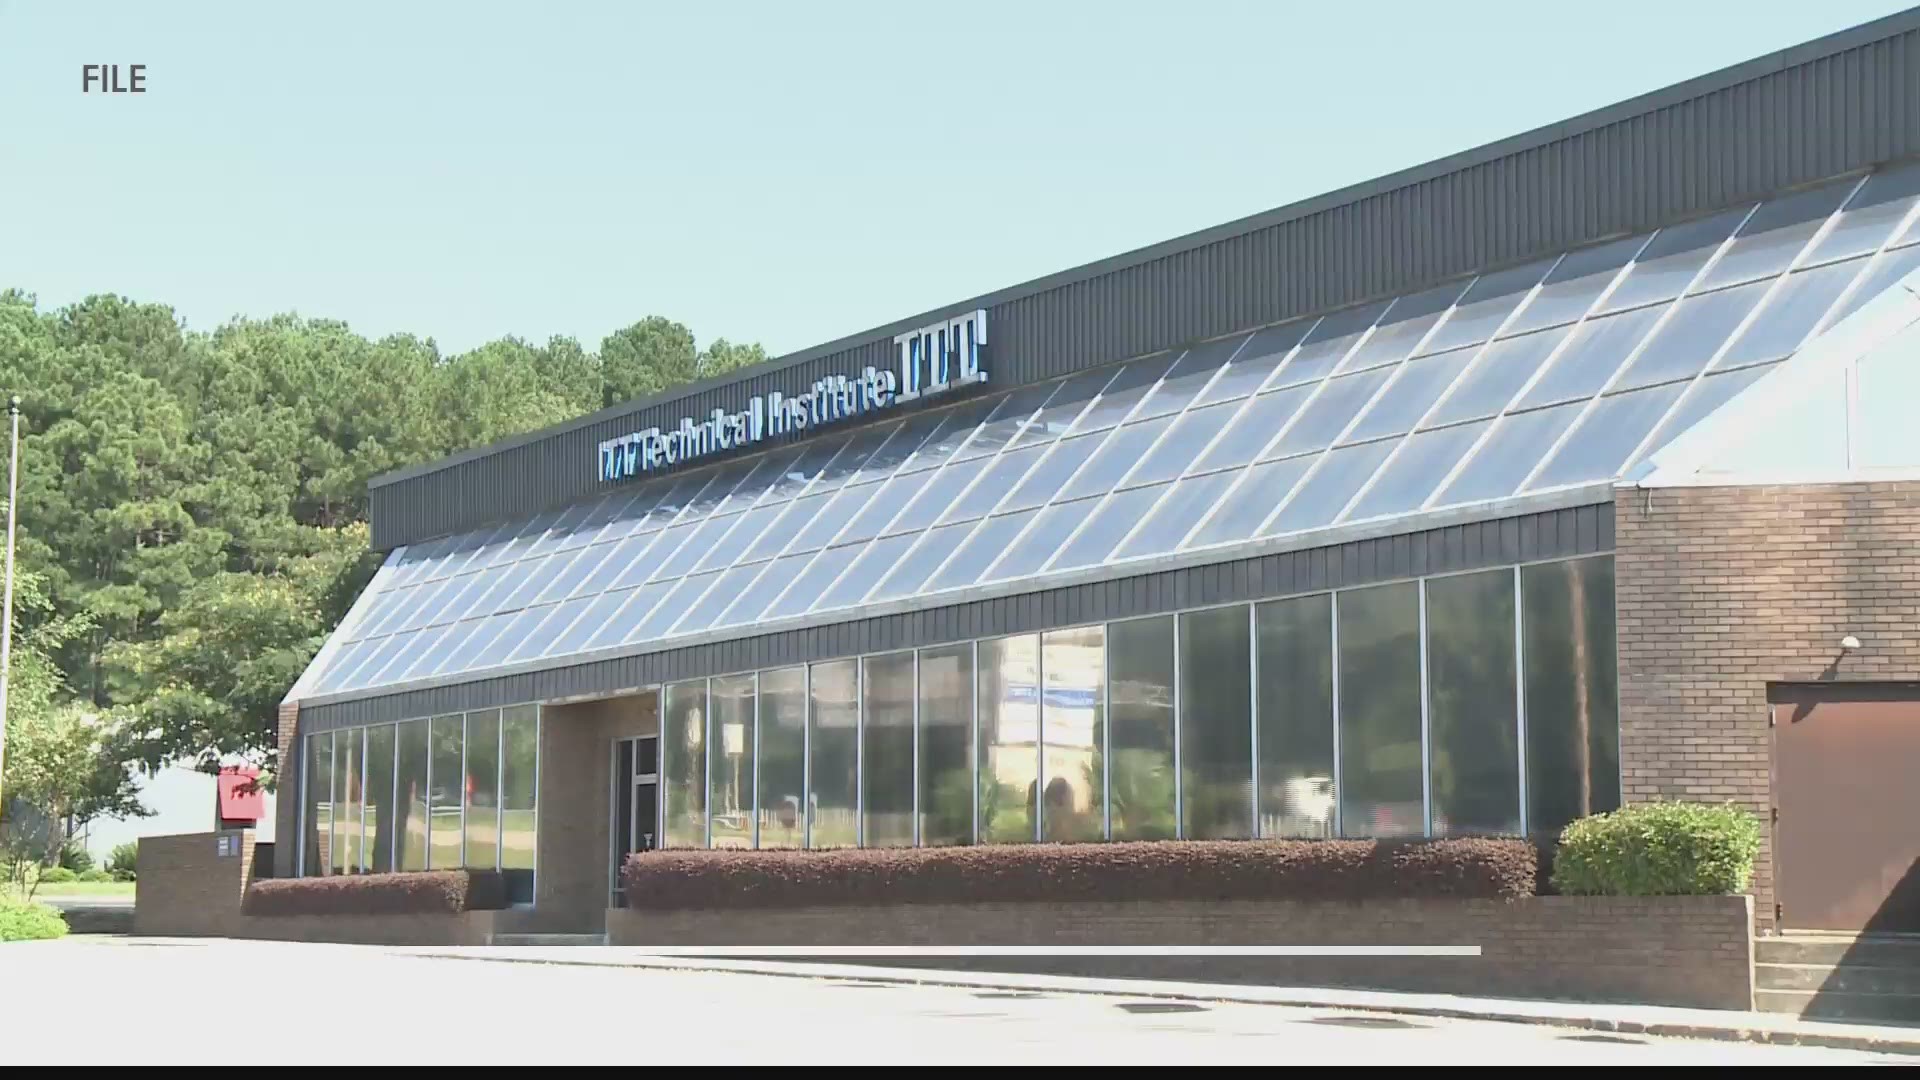 Attorney General Alan Wilson has secured an agreement to obtain $8.6 million in debt relief for approximately 1,000 former ITT Tech students in South Carolina.